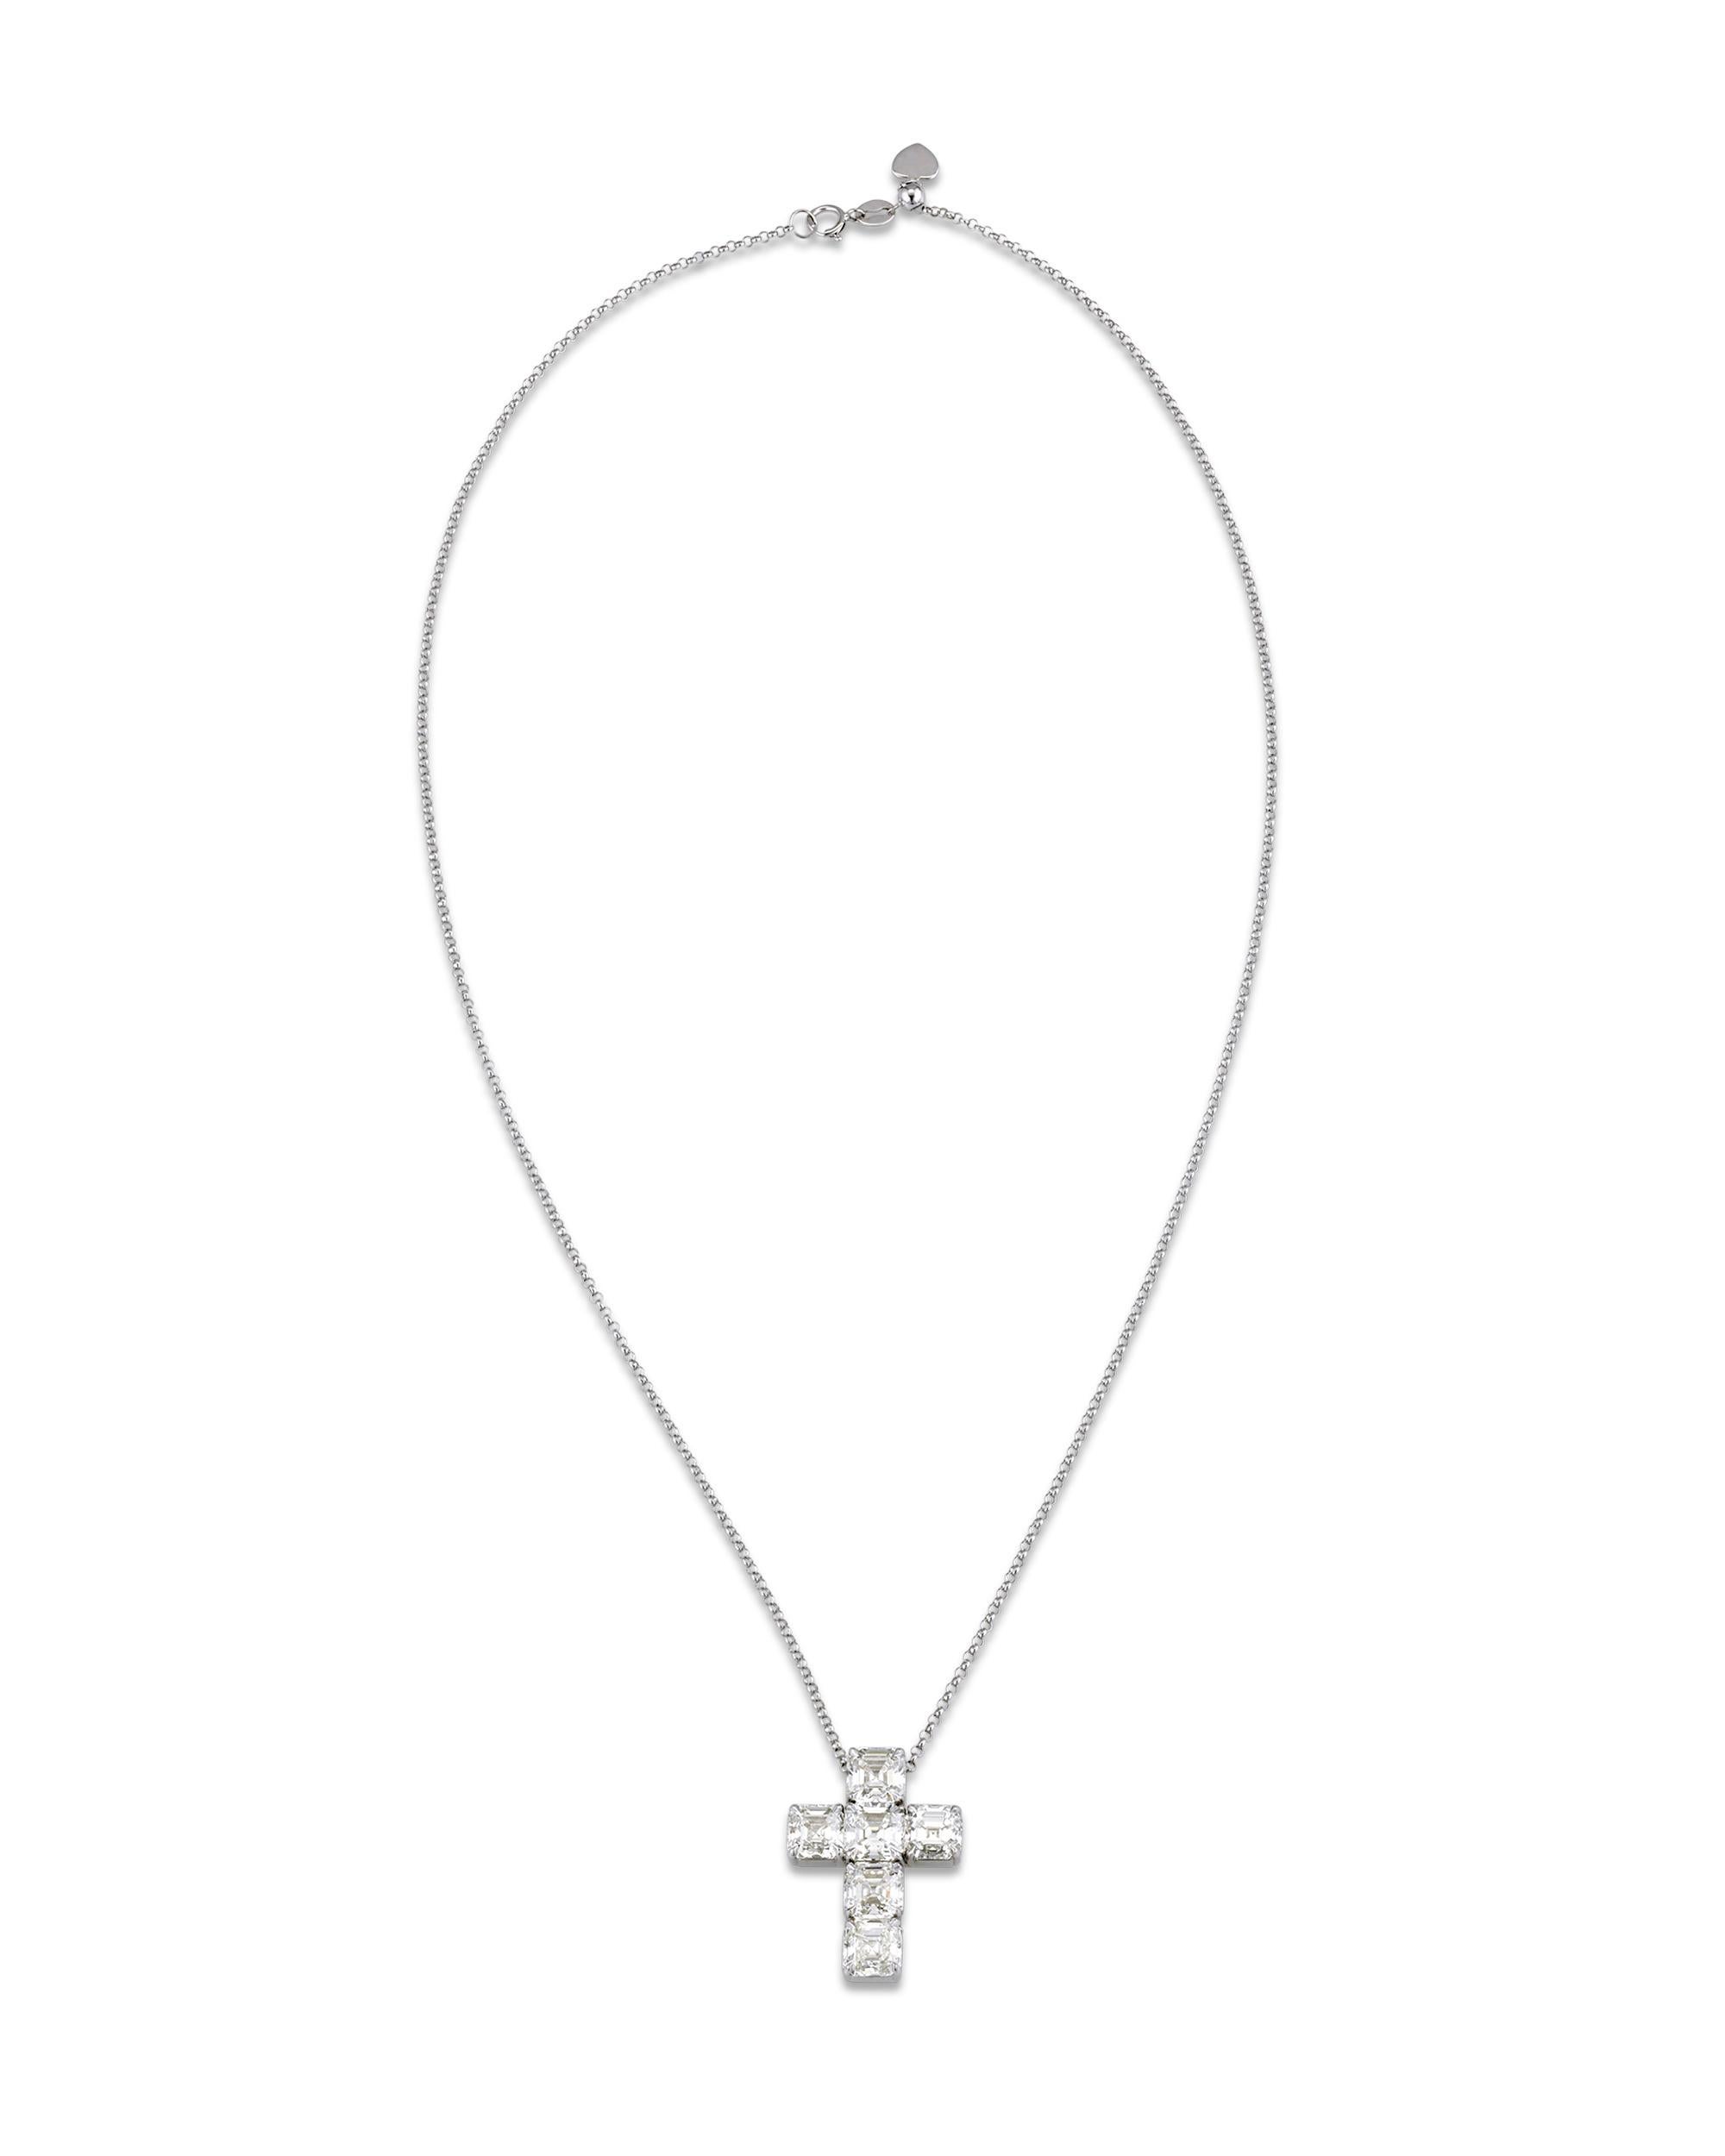 Six impeccably matched Asscher-cut diamonds grace this exquisite cross pendant. These eye-catching gems weigh a brilliant 6.33 total carats, with each stone ranging from 1.00 carat to 1.12 carats. To find six stones so beautifully matched is quite